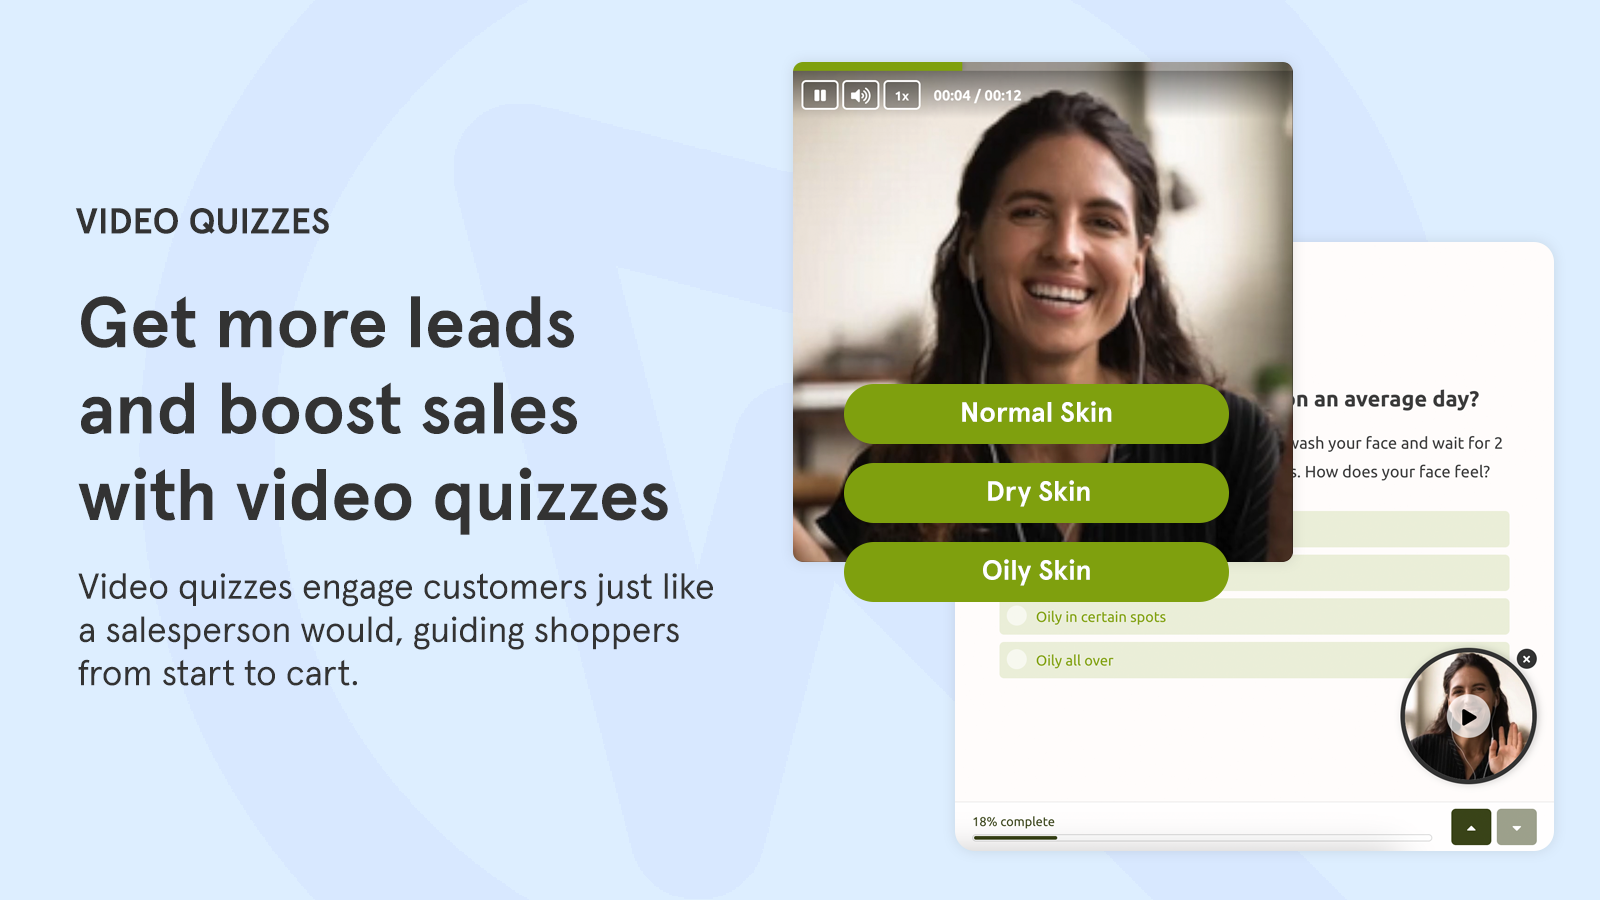 Get more leads and boost sales with video quizzes